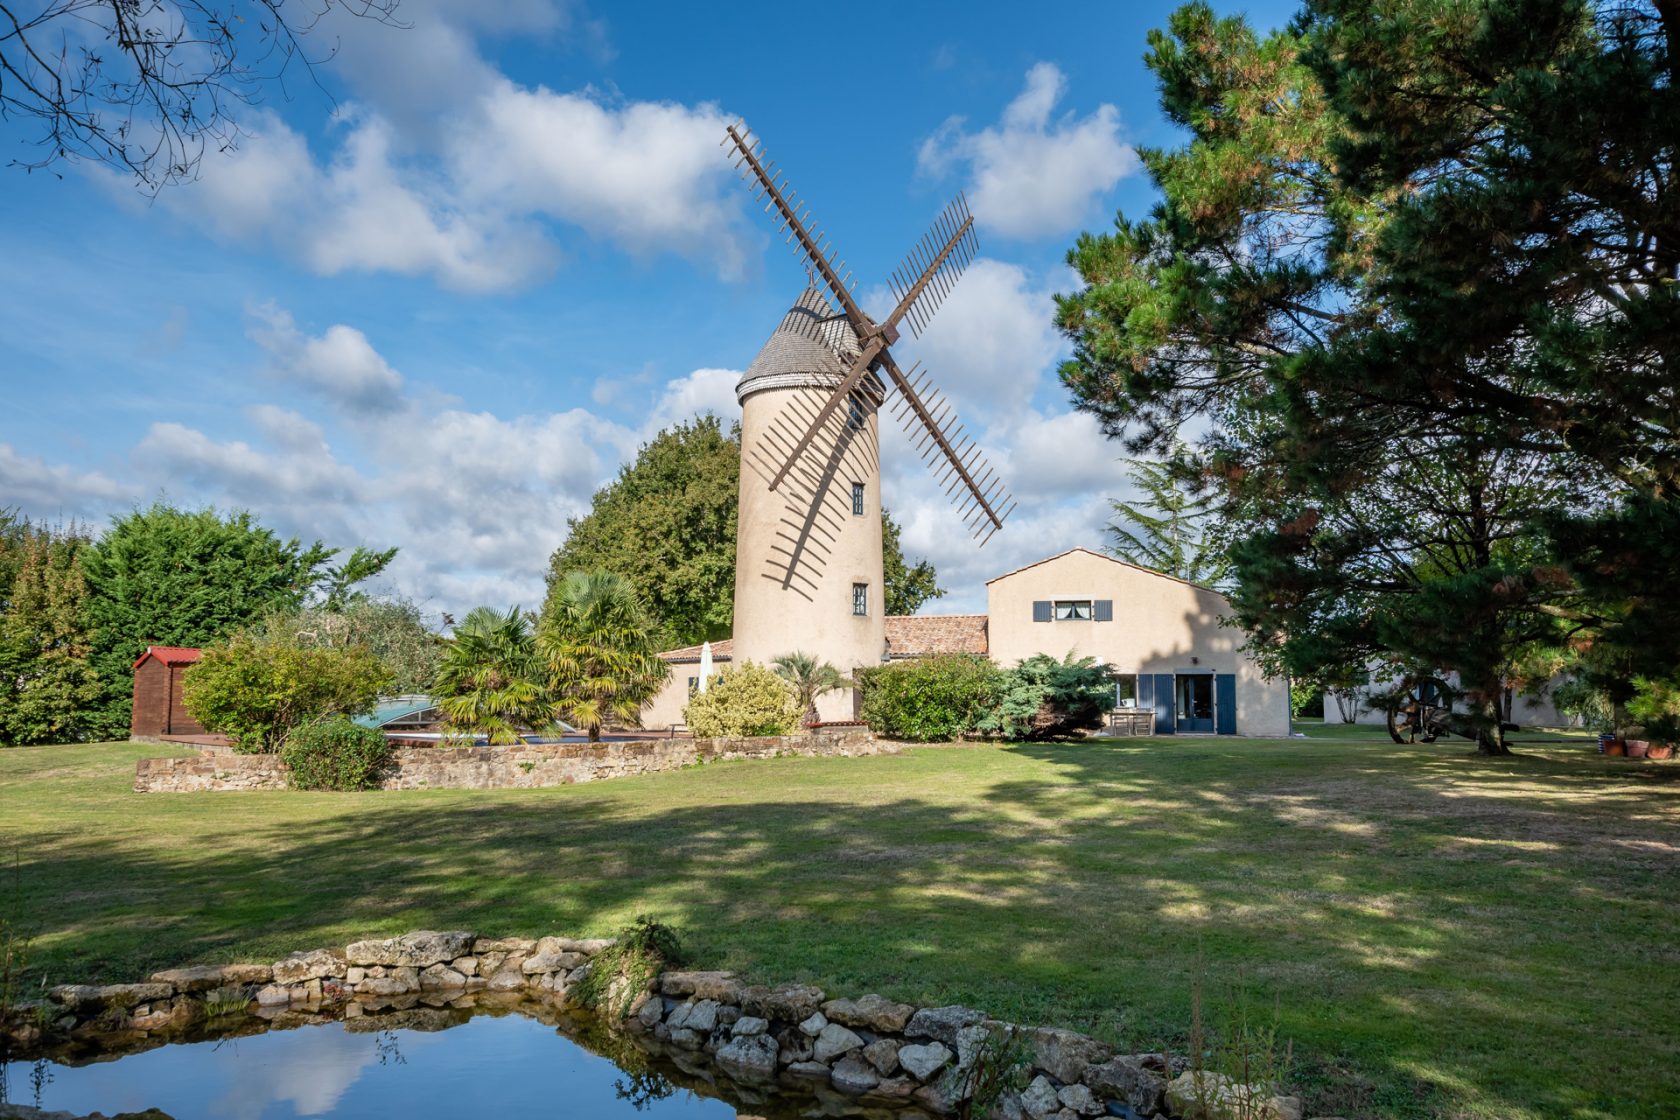 Superb mill at the gateway to the Vendée coast